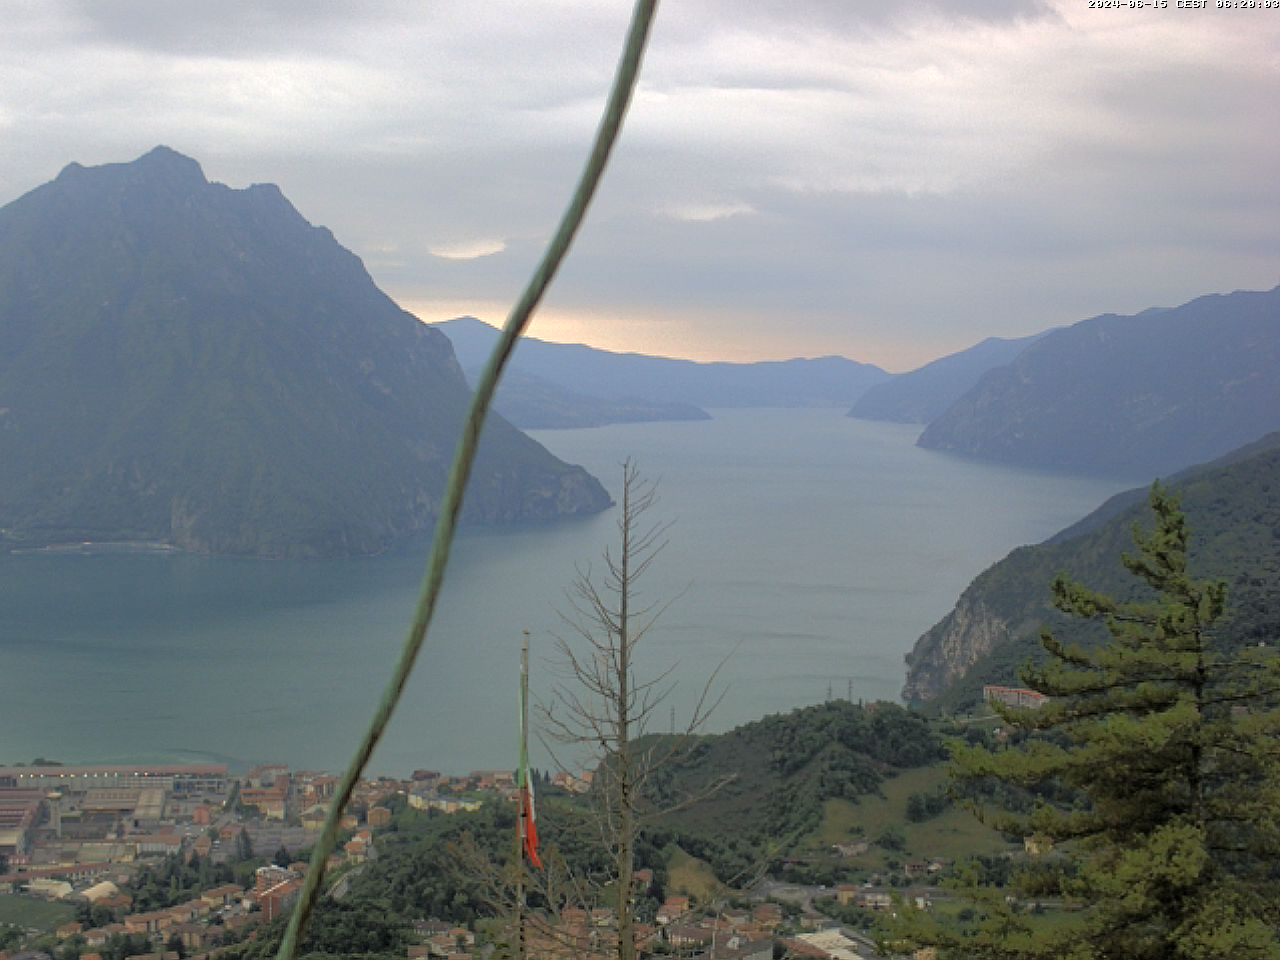 Lovere (Lac d'Iseo) Me. 06:29